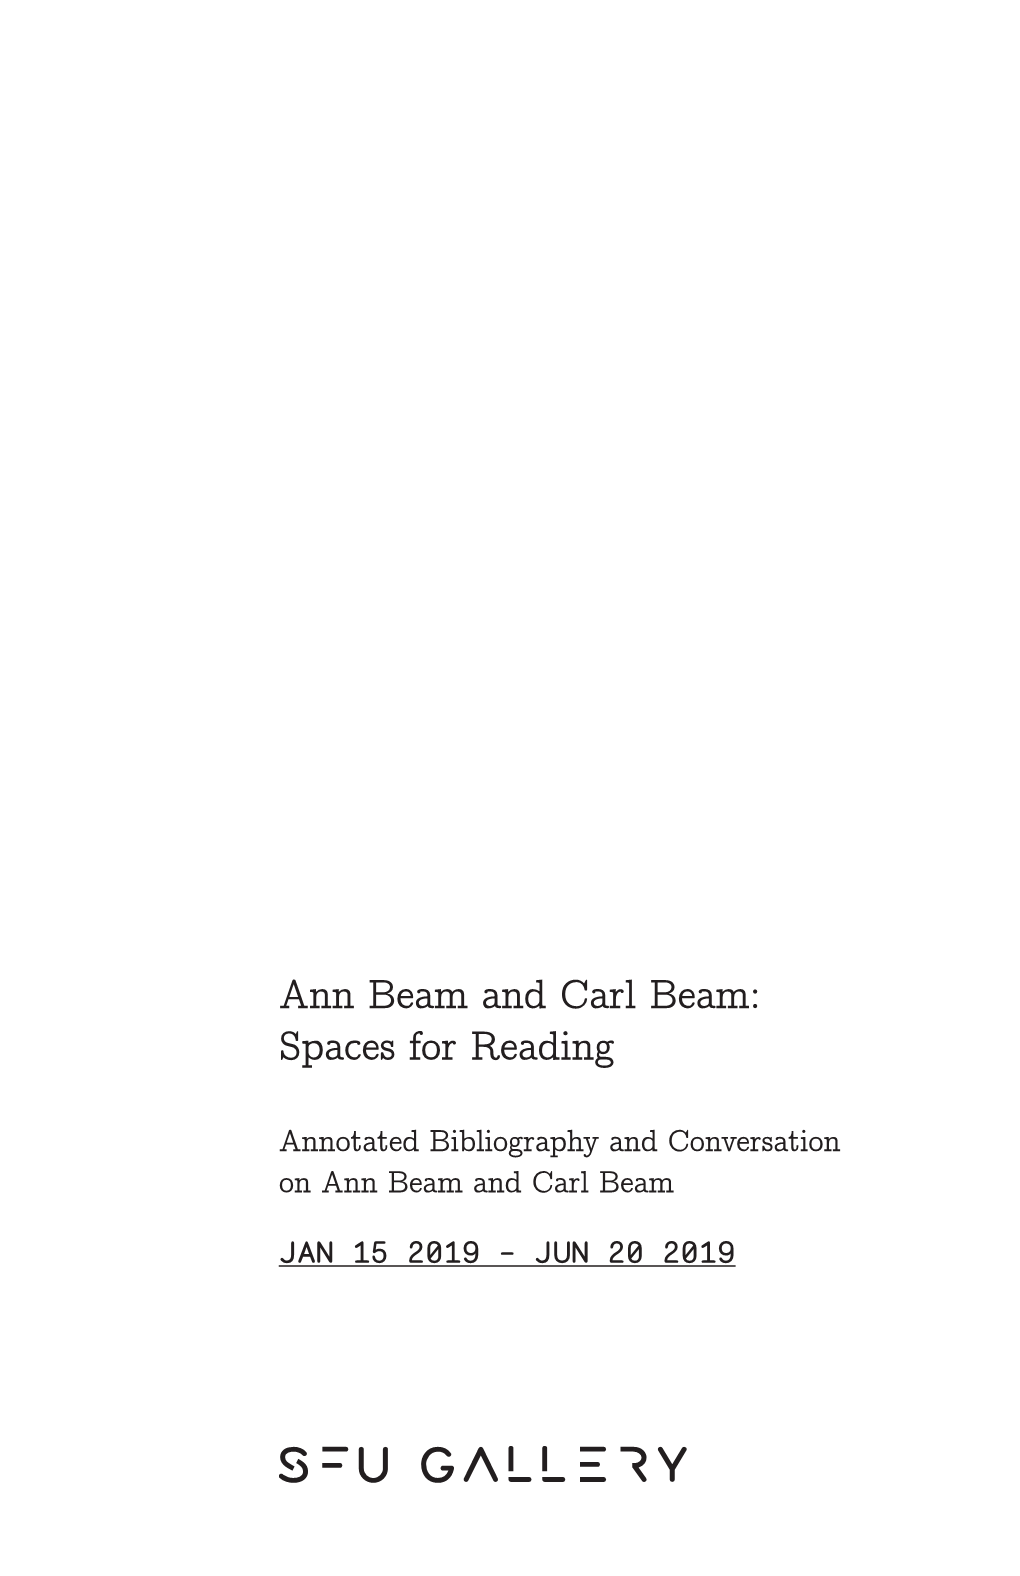 Ann Beam and Carl Beam: Spaces for Reading